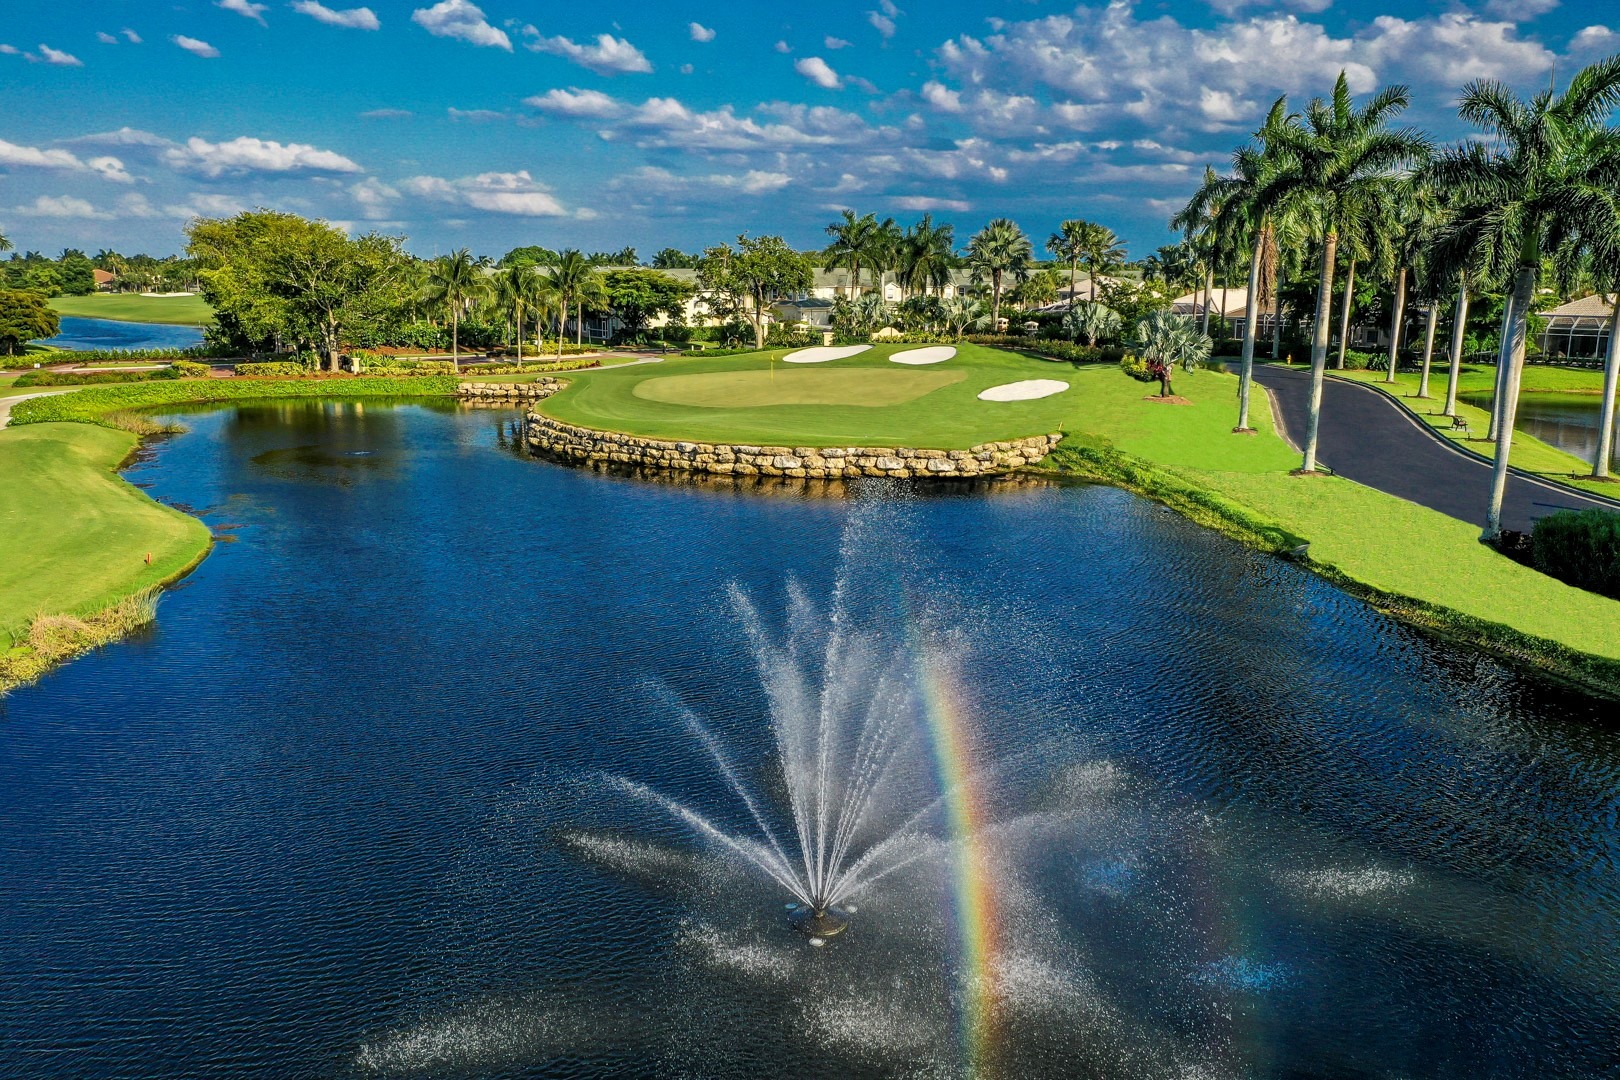 Lake and fountain in golf course - Gulf Harbour Yacht and Country Club